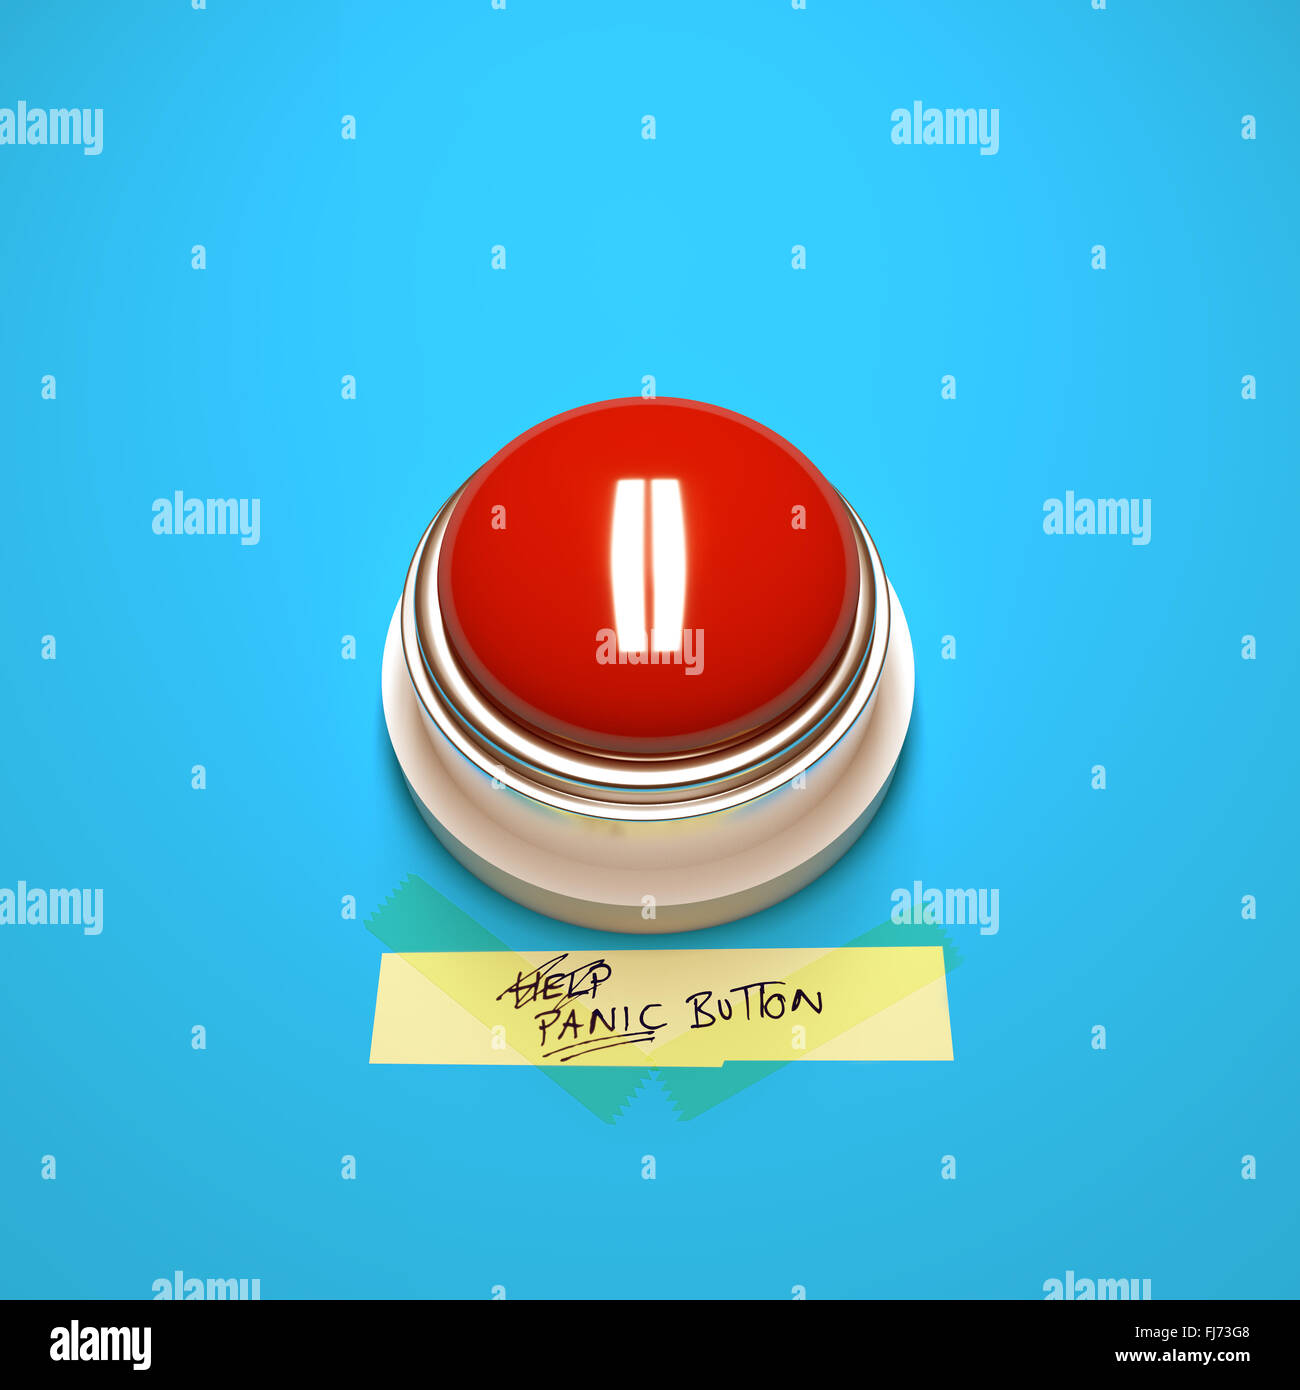 Panic Button High Resolution Stock Photography and Images - Alamy